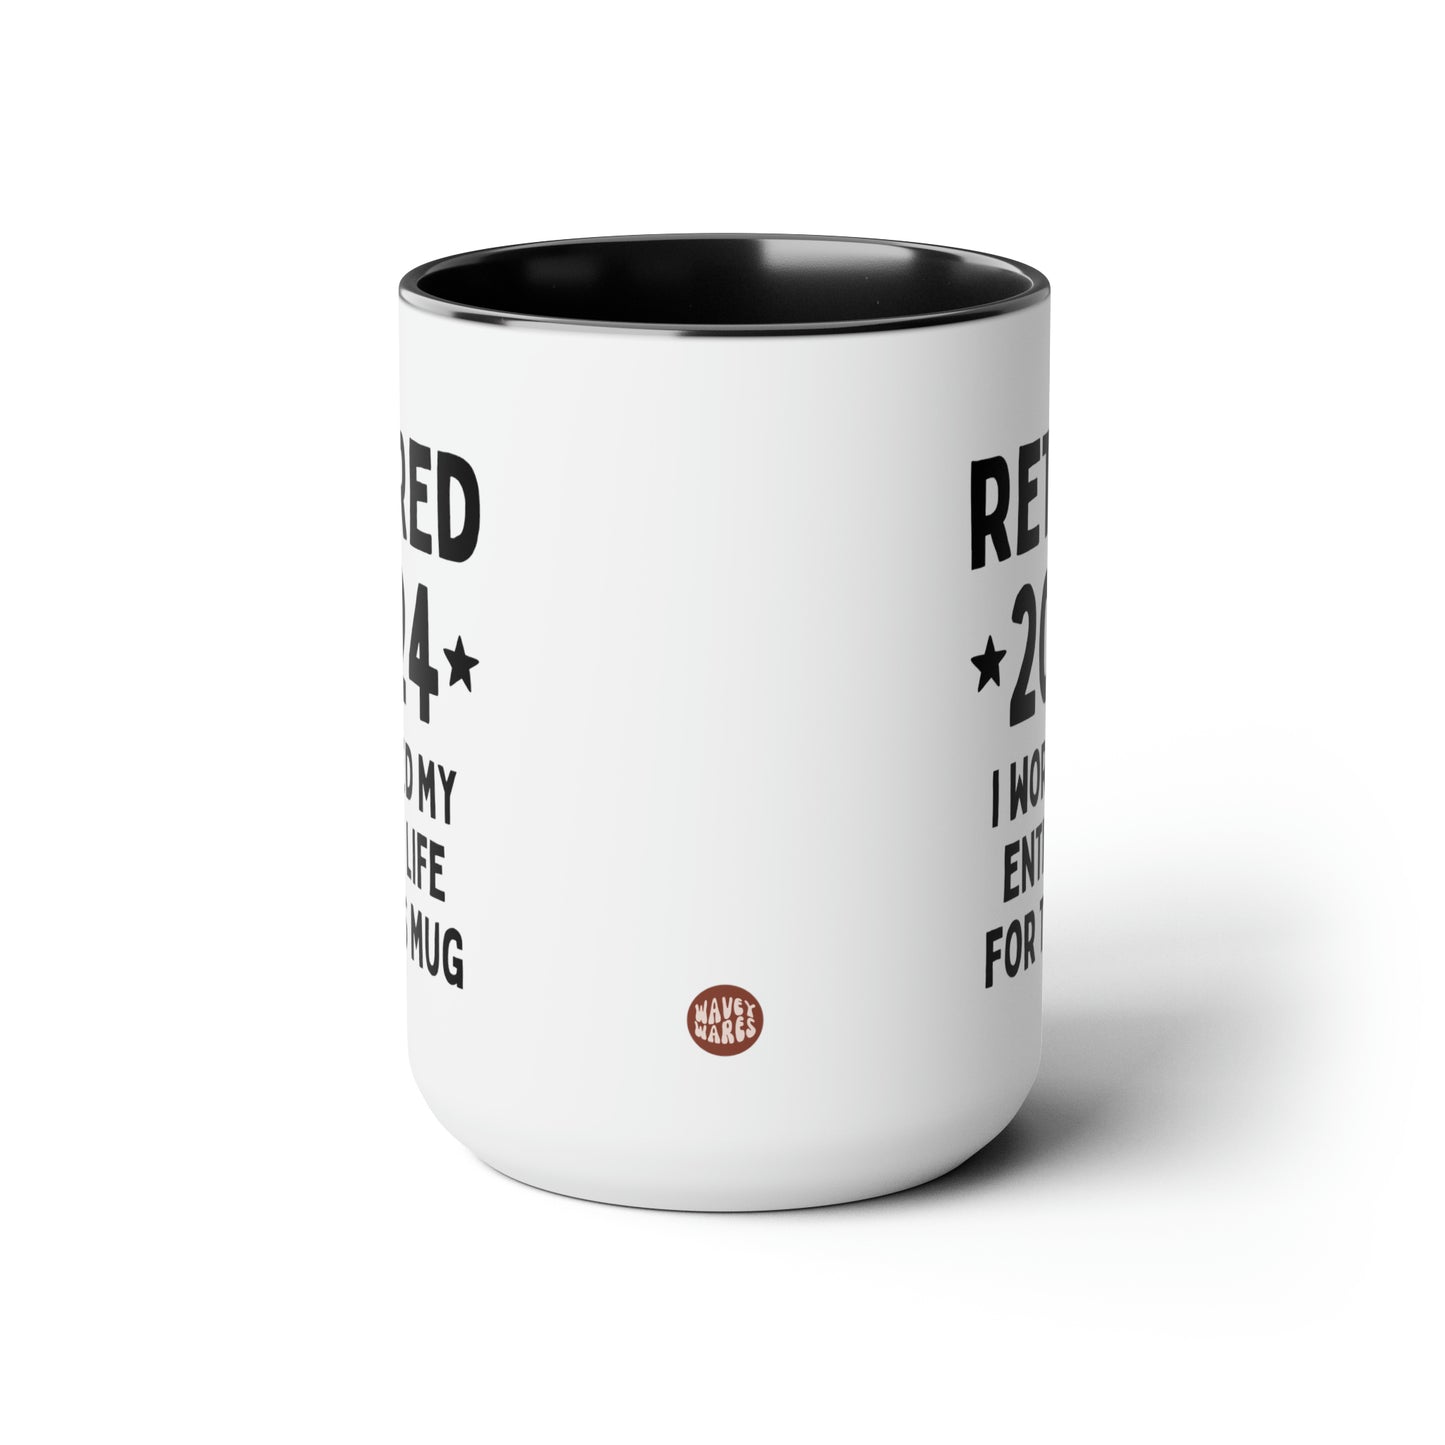 Retired 2024 I Worked My Entire Life For This Mug 15oz white with black accent funny large coffee mug gift for retirement man woman waveywares wavey wares wavywares wavy wares side